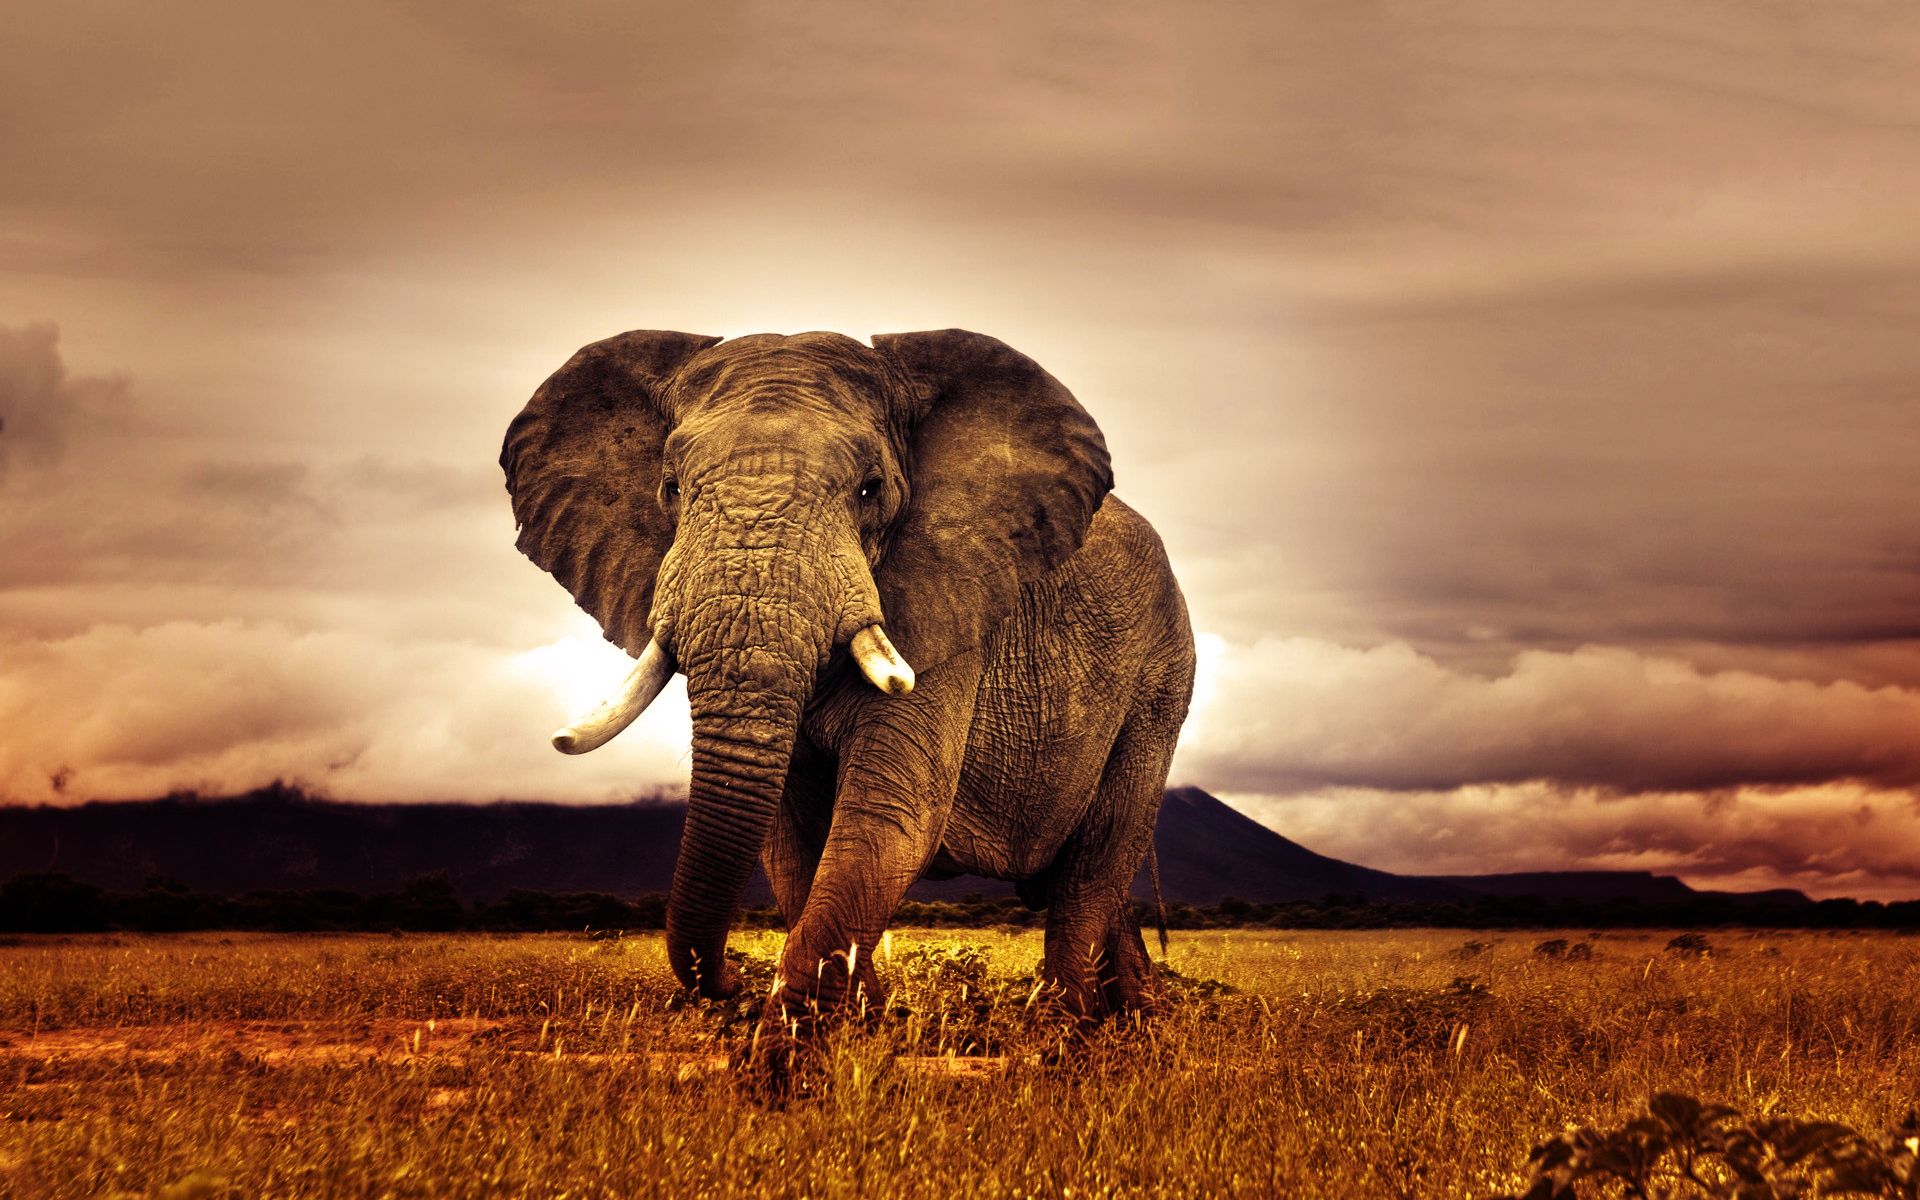 HD wallpaper, Elephant, Pictures, African